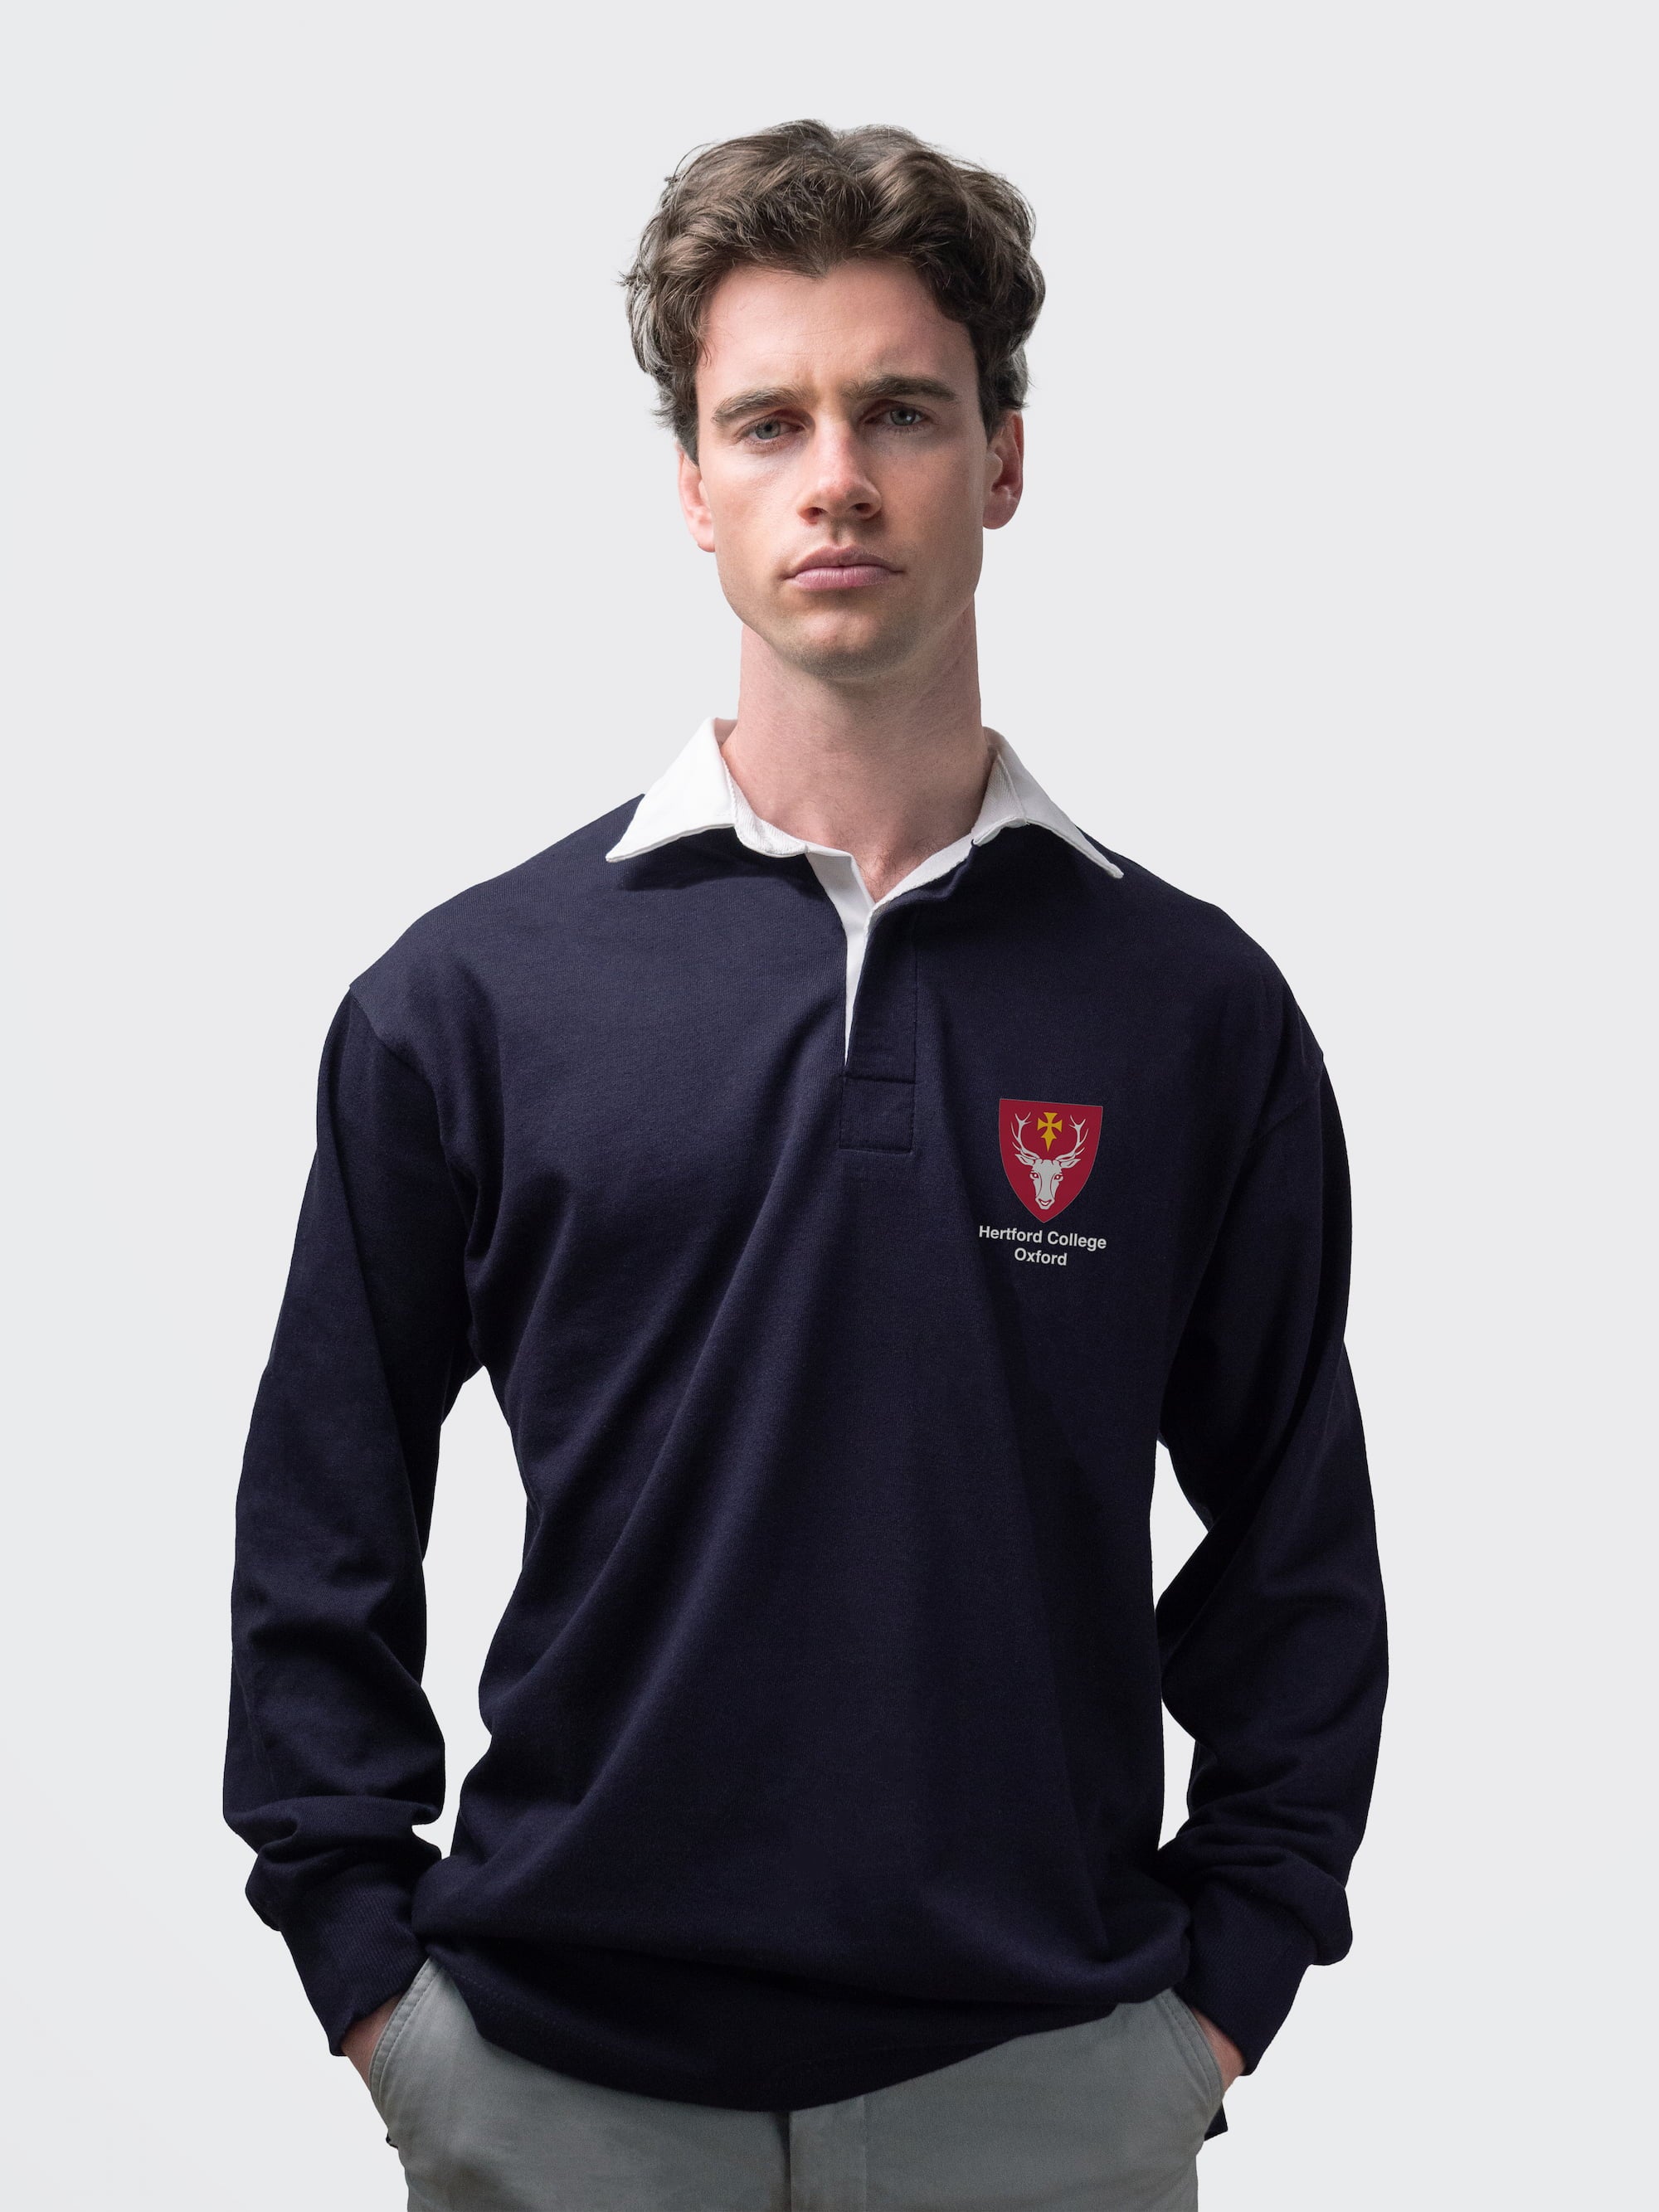 Hertford student wearing an embroidered mens rugby shirt in navy